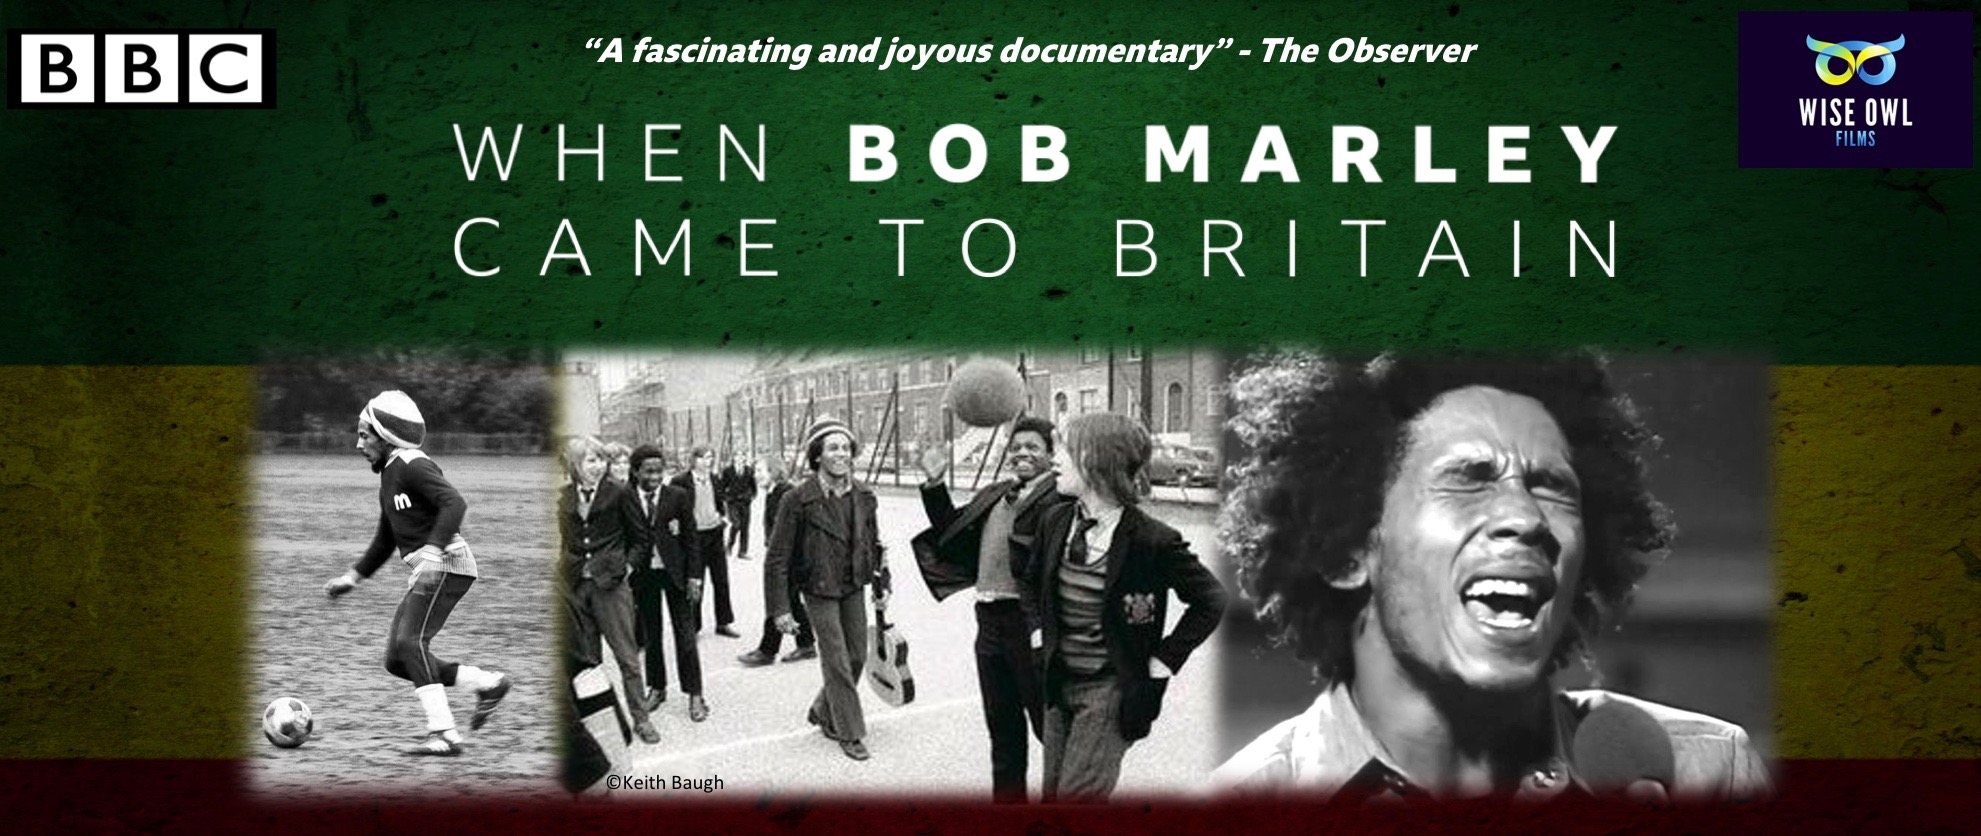 WISE OWL WINS PRESS PLAUDITS FOR BOB MARLEY DOC